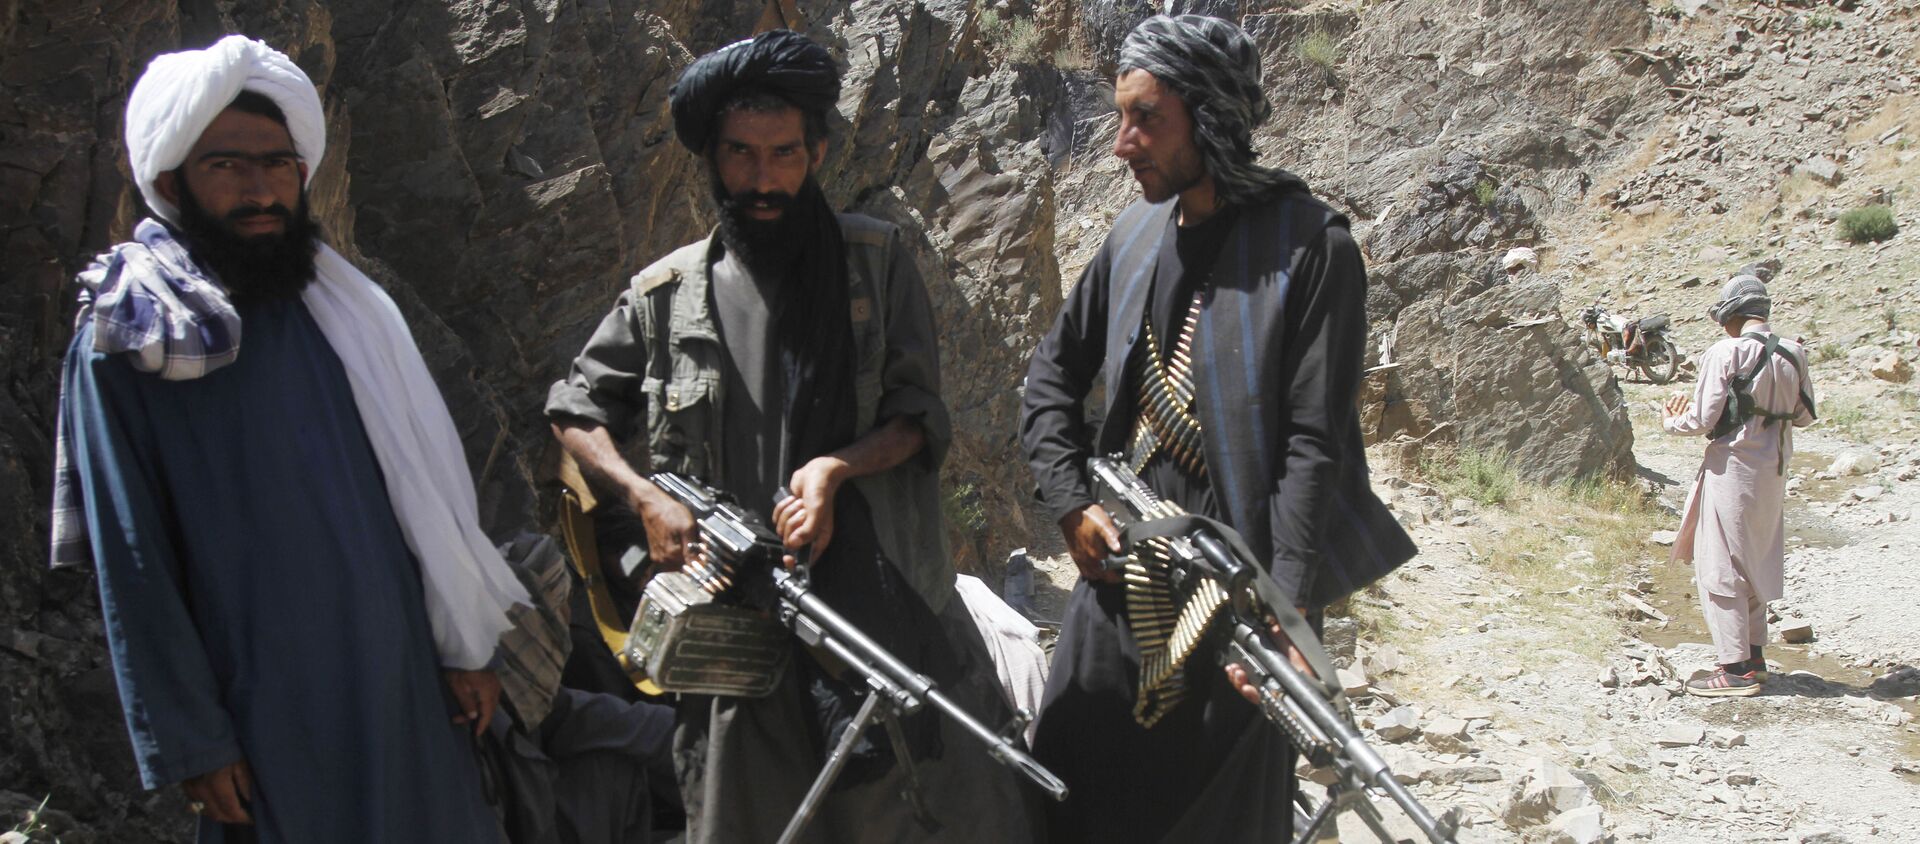 Members of a breakaway faction of the Taliban fighters guard during a patrol in Shindand district of Herat province, Afghanistan (File) - Sputnik International, 1920, 29.01.2021